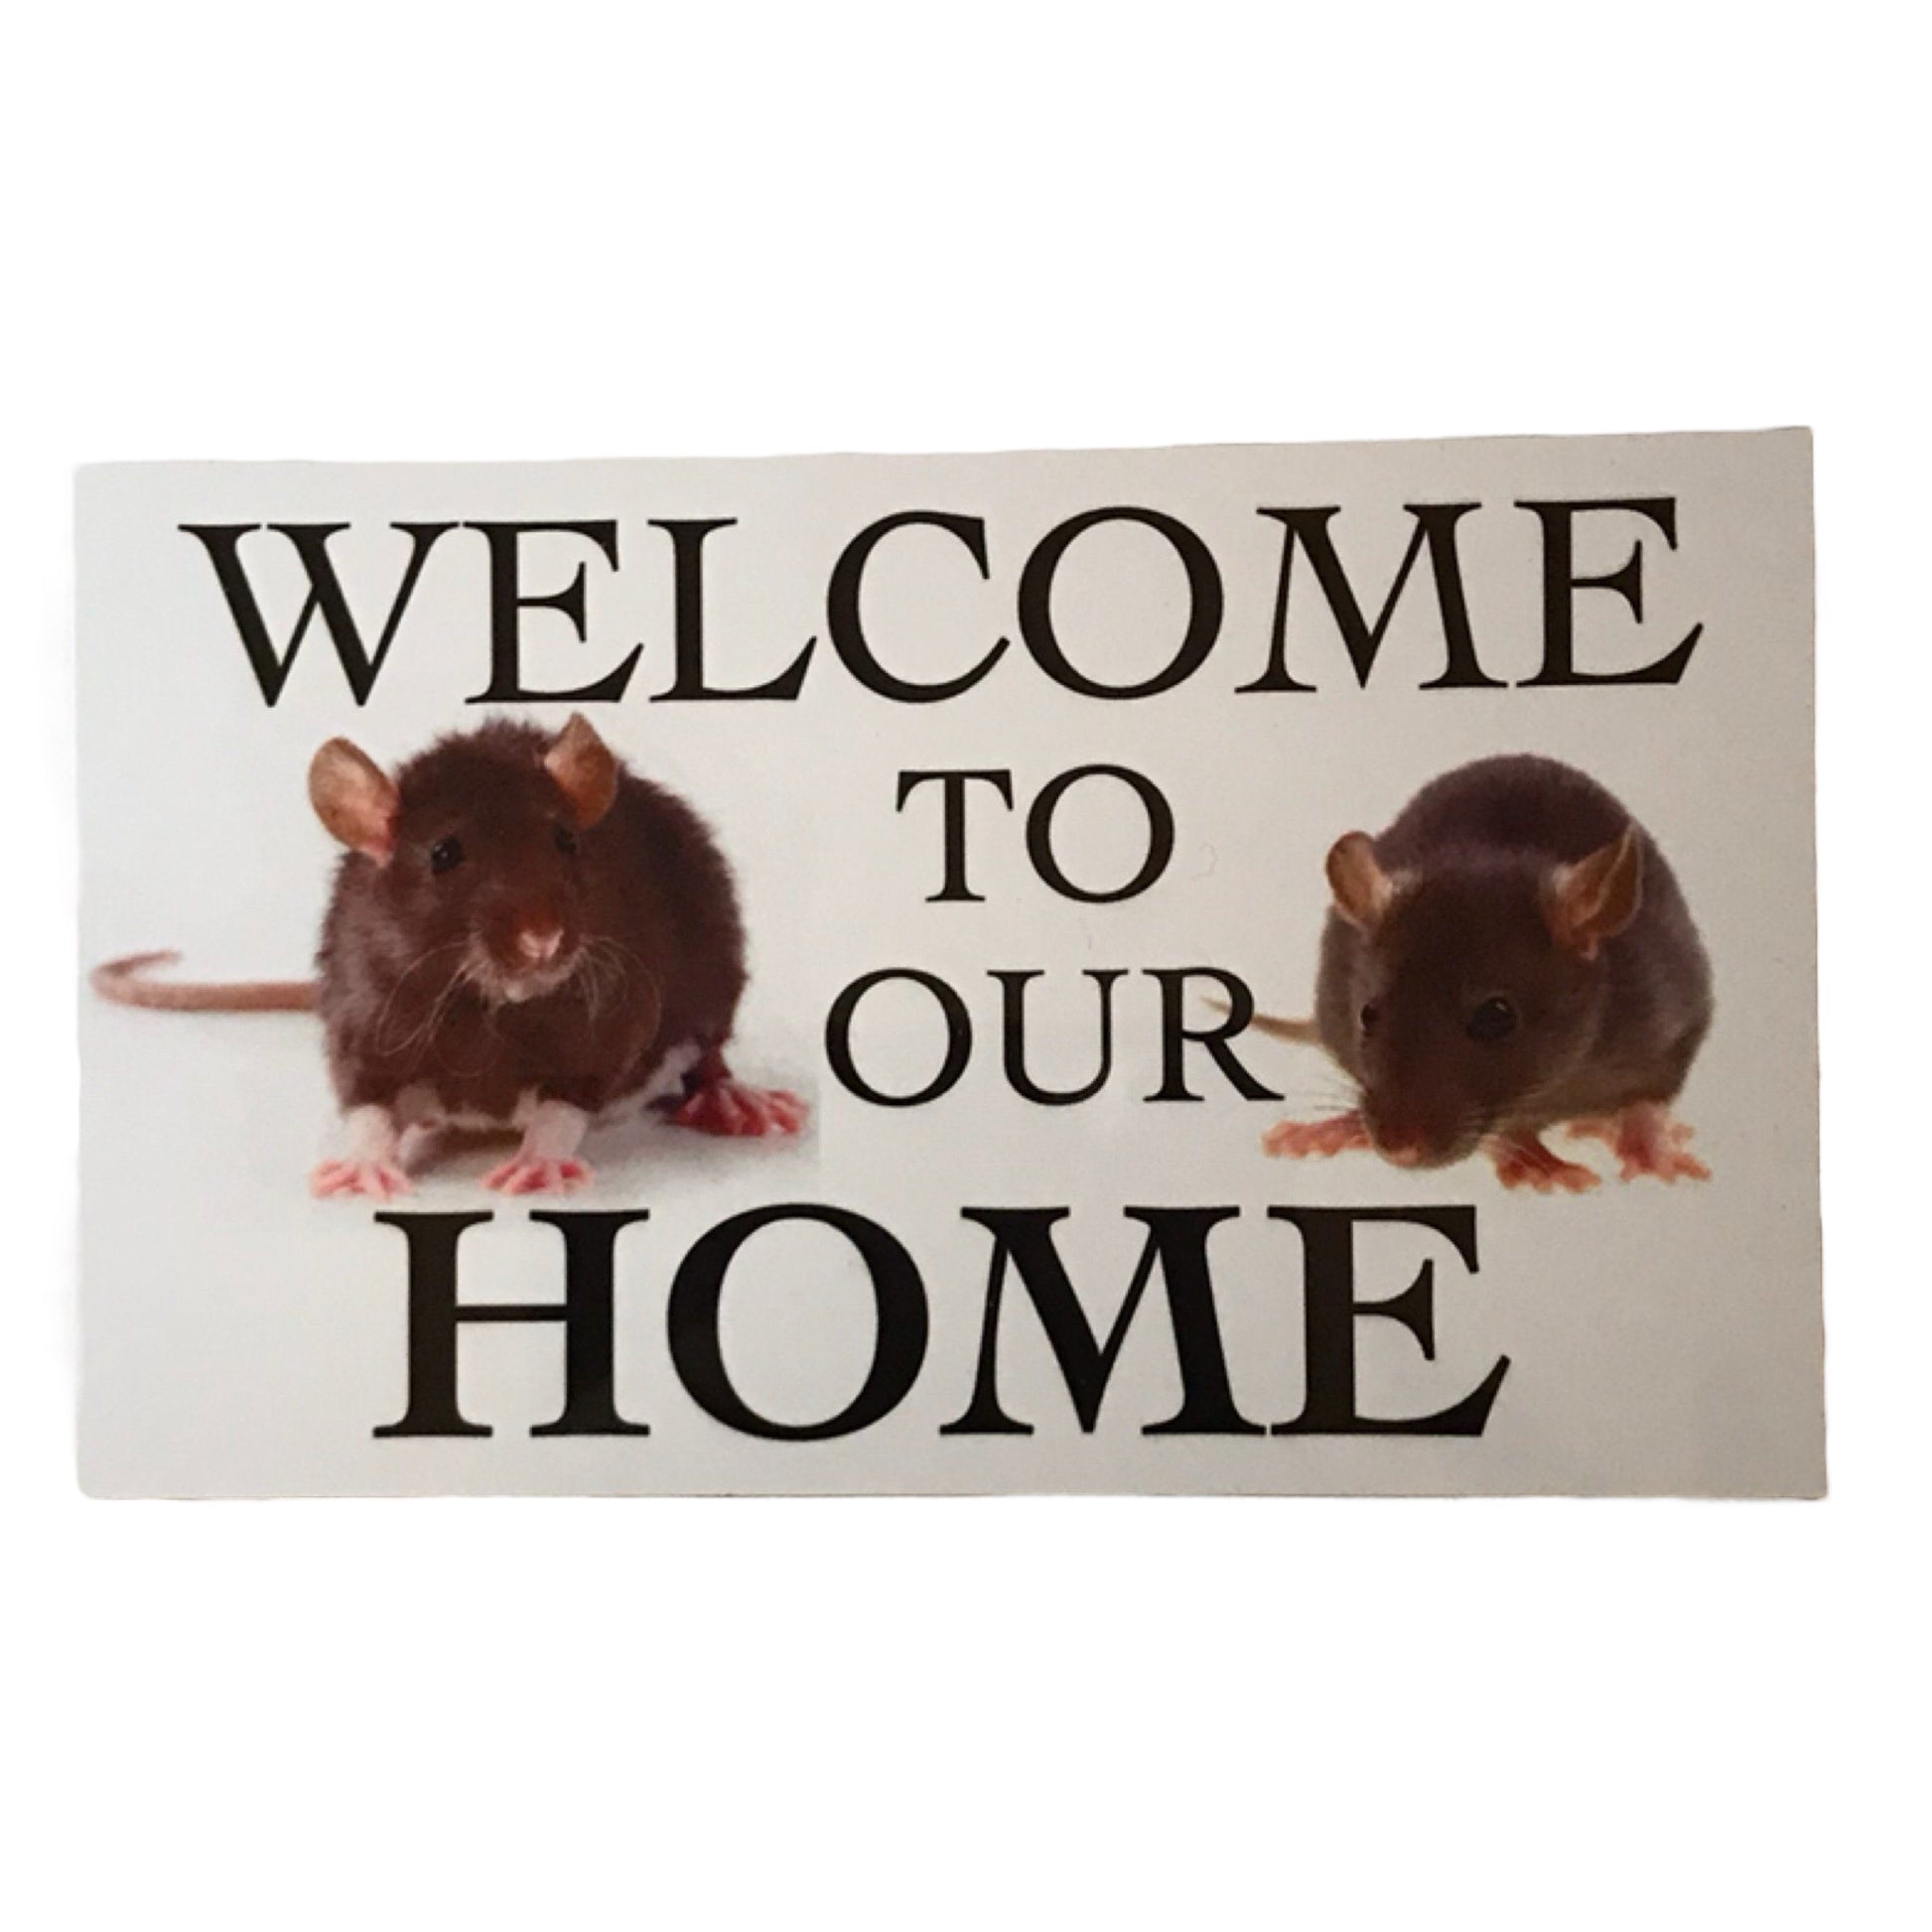 Rats Rat Welcome To Our Home Sign - The Renmy Store Homewares & Gifts 